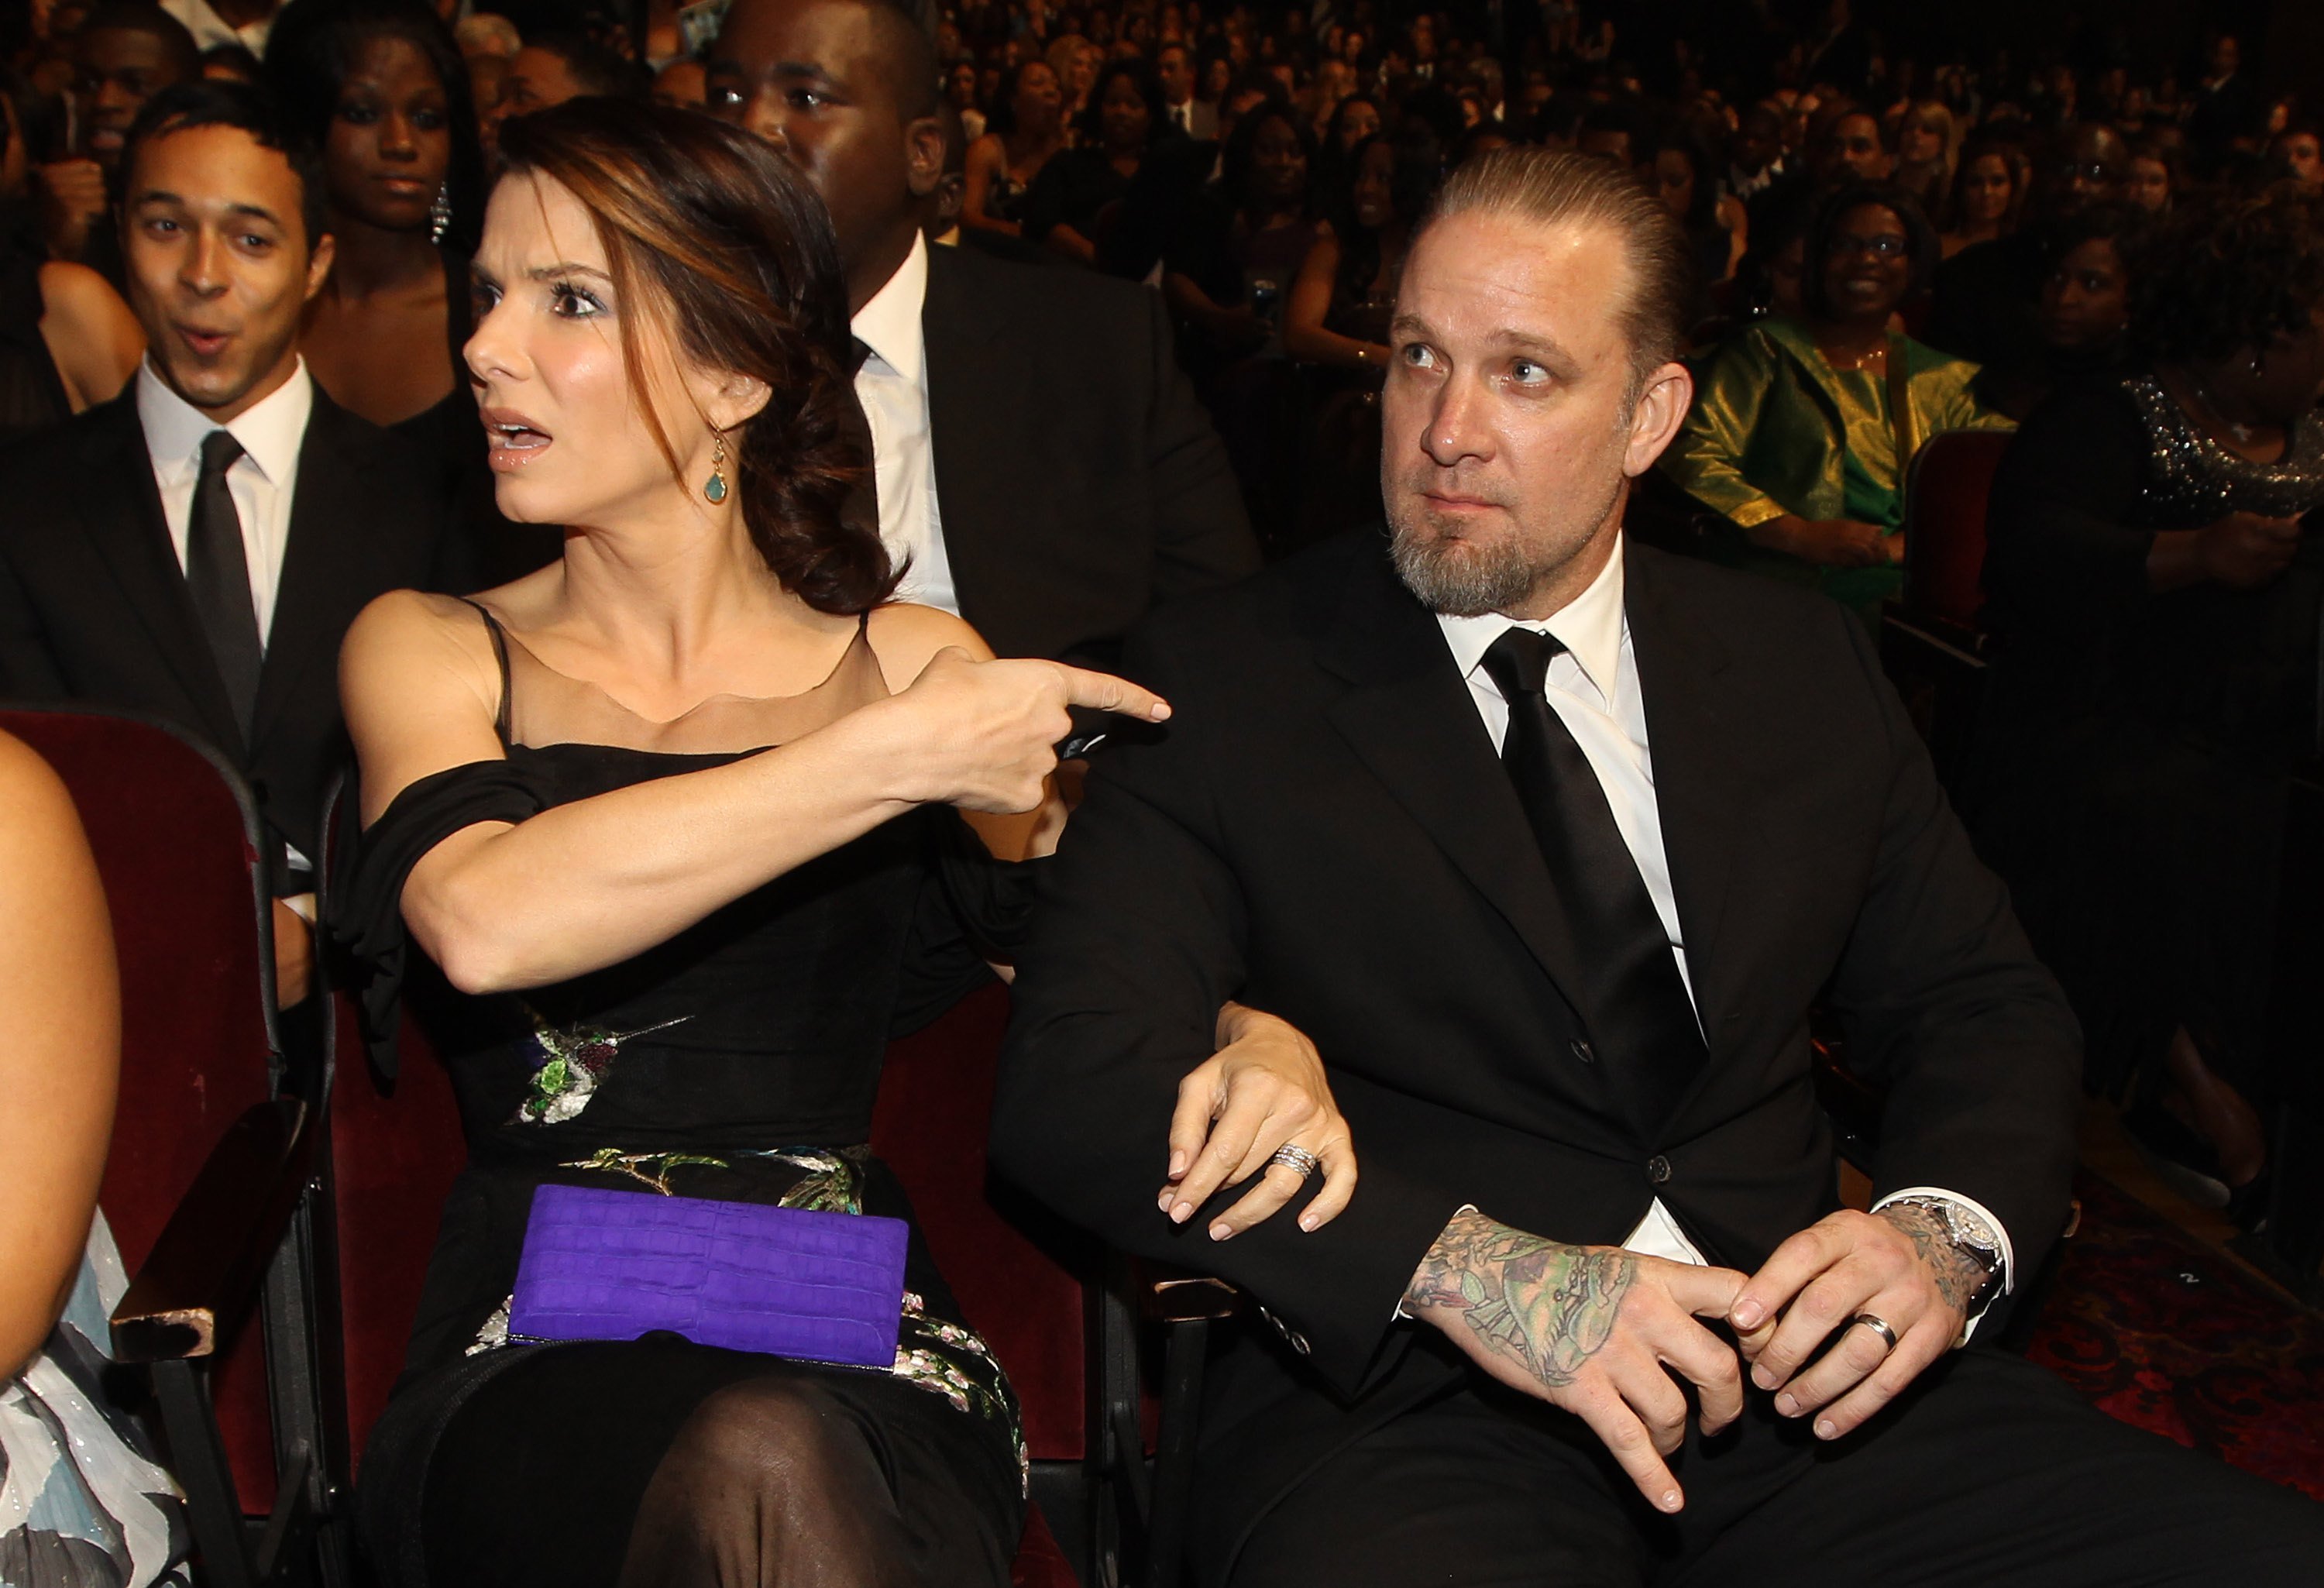 Sandra Bullock with her former husband Jesse James at the 41st NAACP Image Awards in Los Angeles on February 26, 2010. | Source: Christopher Polk/ Getty Images